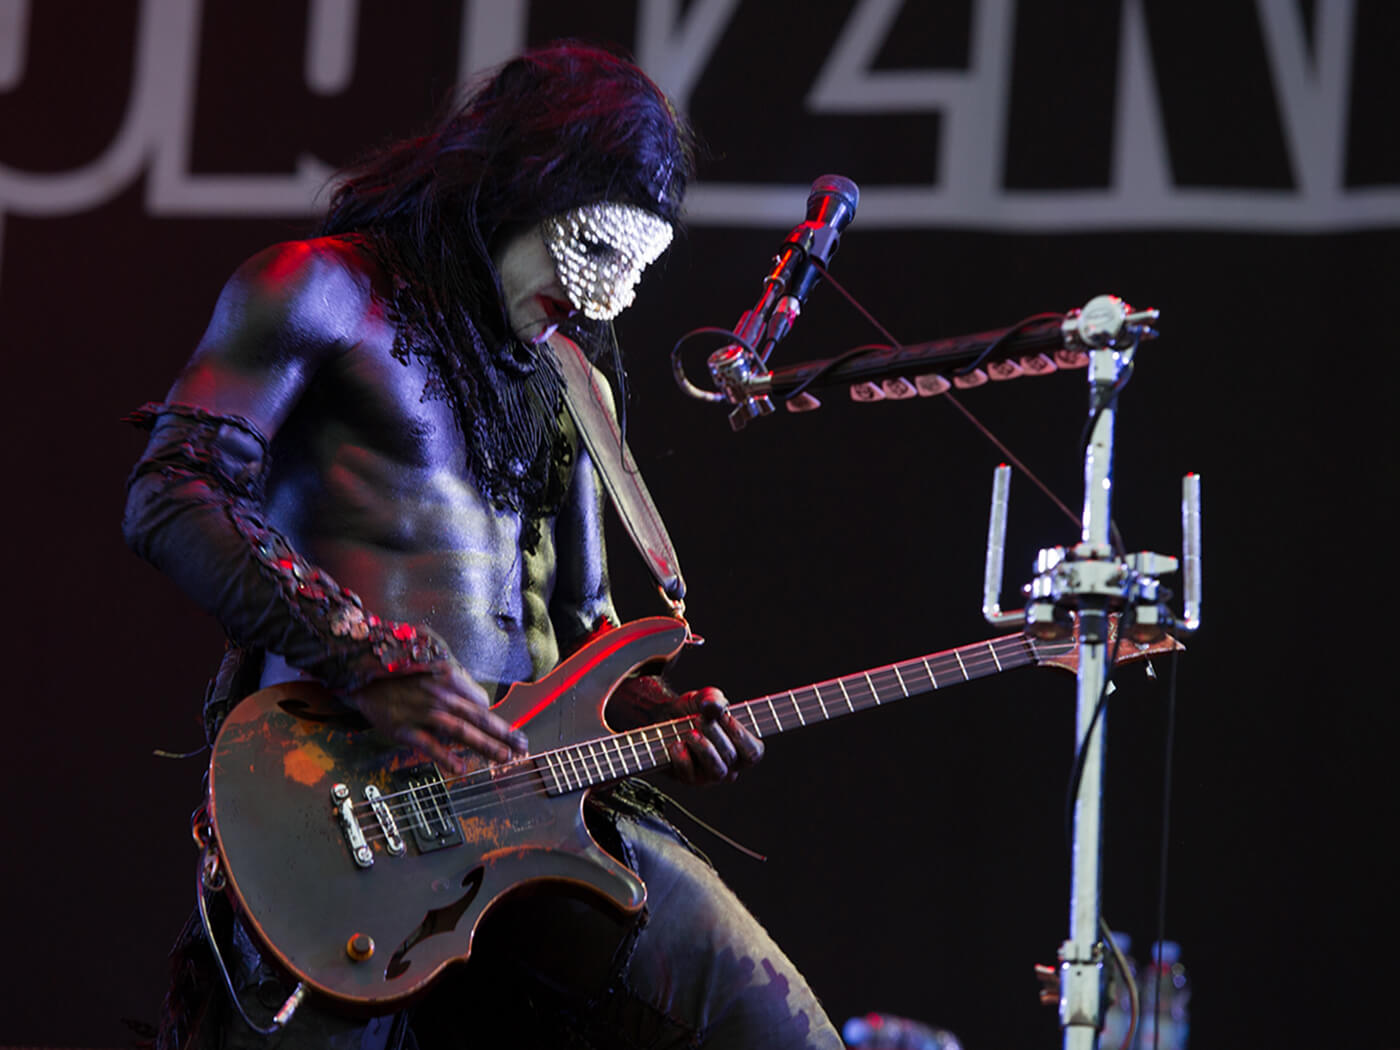 Wes Borland of Limp Bizkit performing with his Custom Cremona 4-string in 2013, photo by Ollie Millington/Getty Images